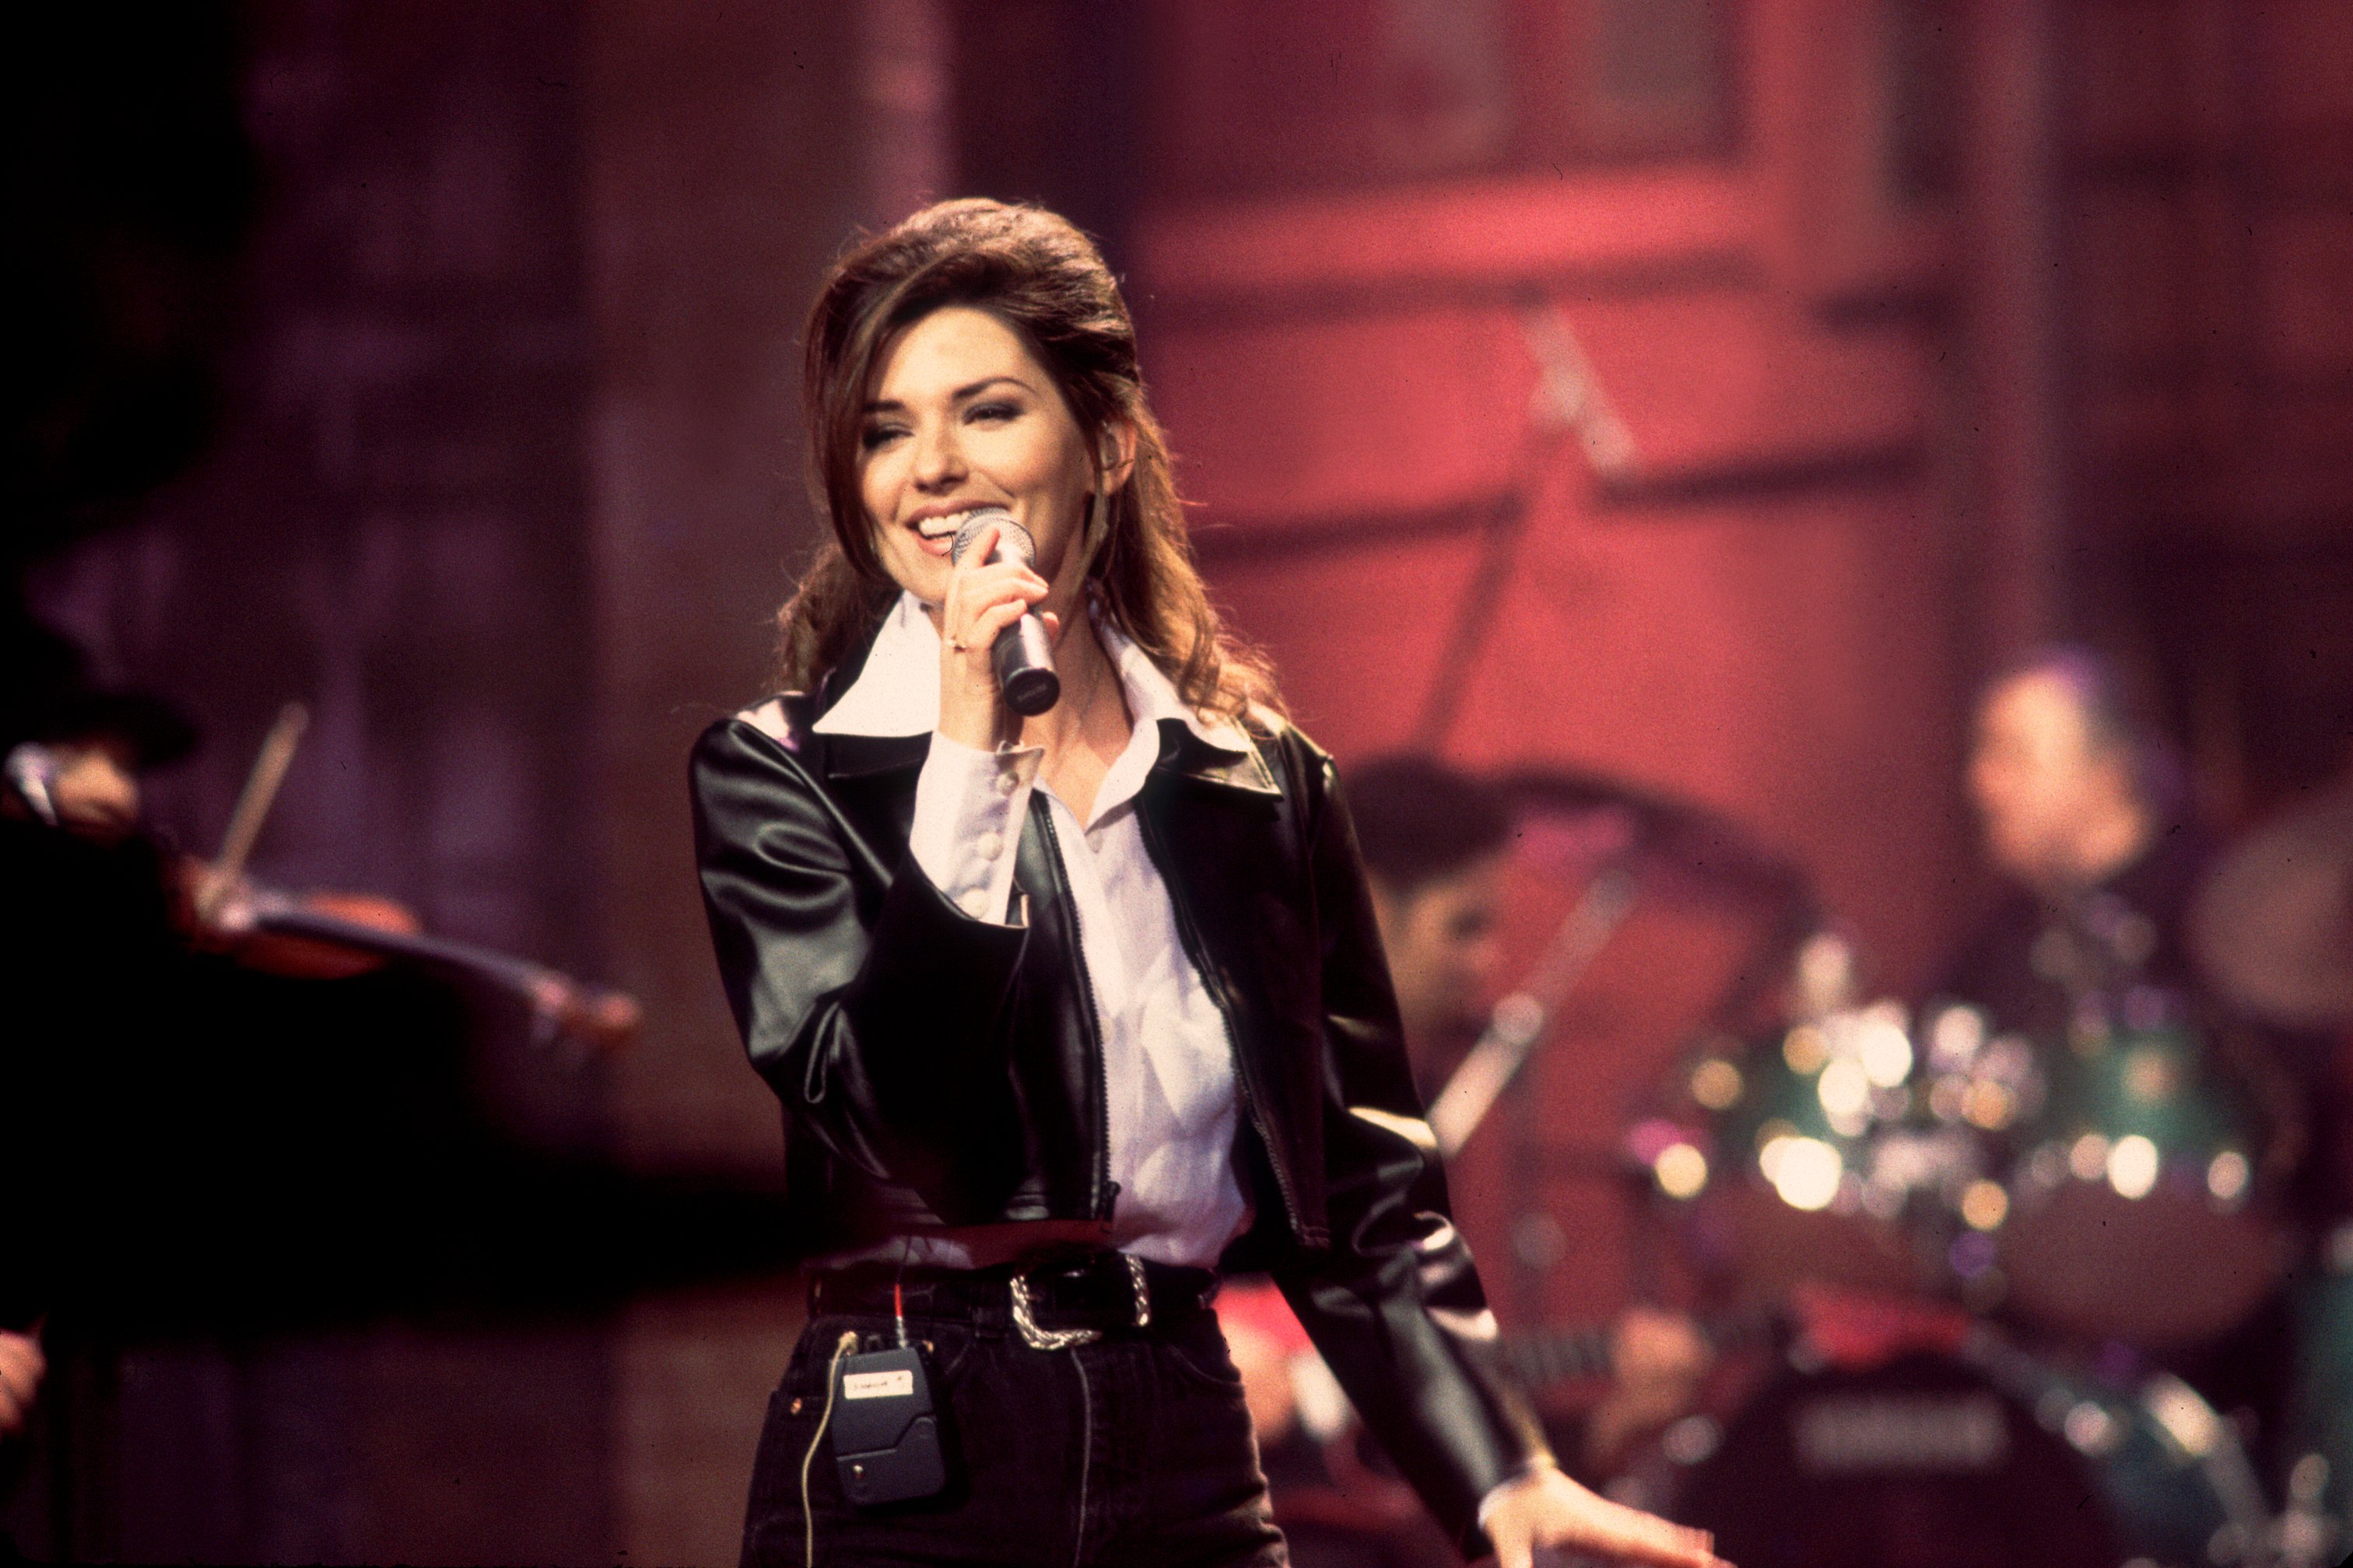 Canadian Country and Pop musician Shania Twain performs during a soundcheck for her appearance on the David Letterman Show